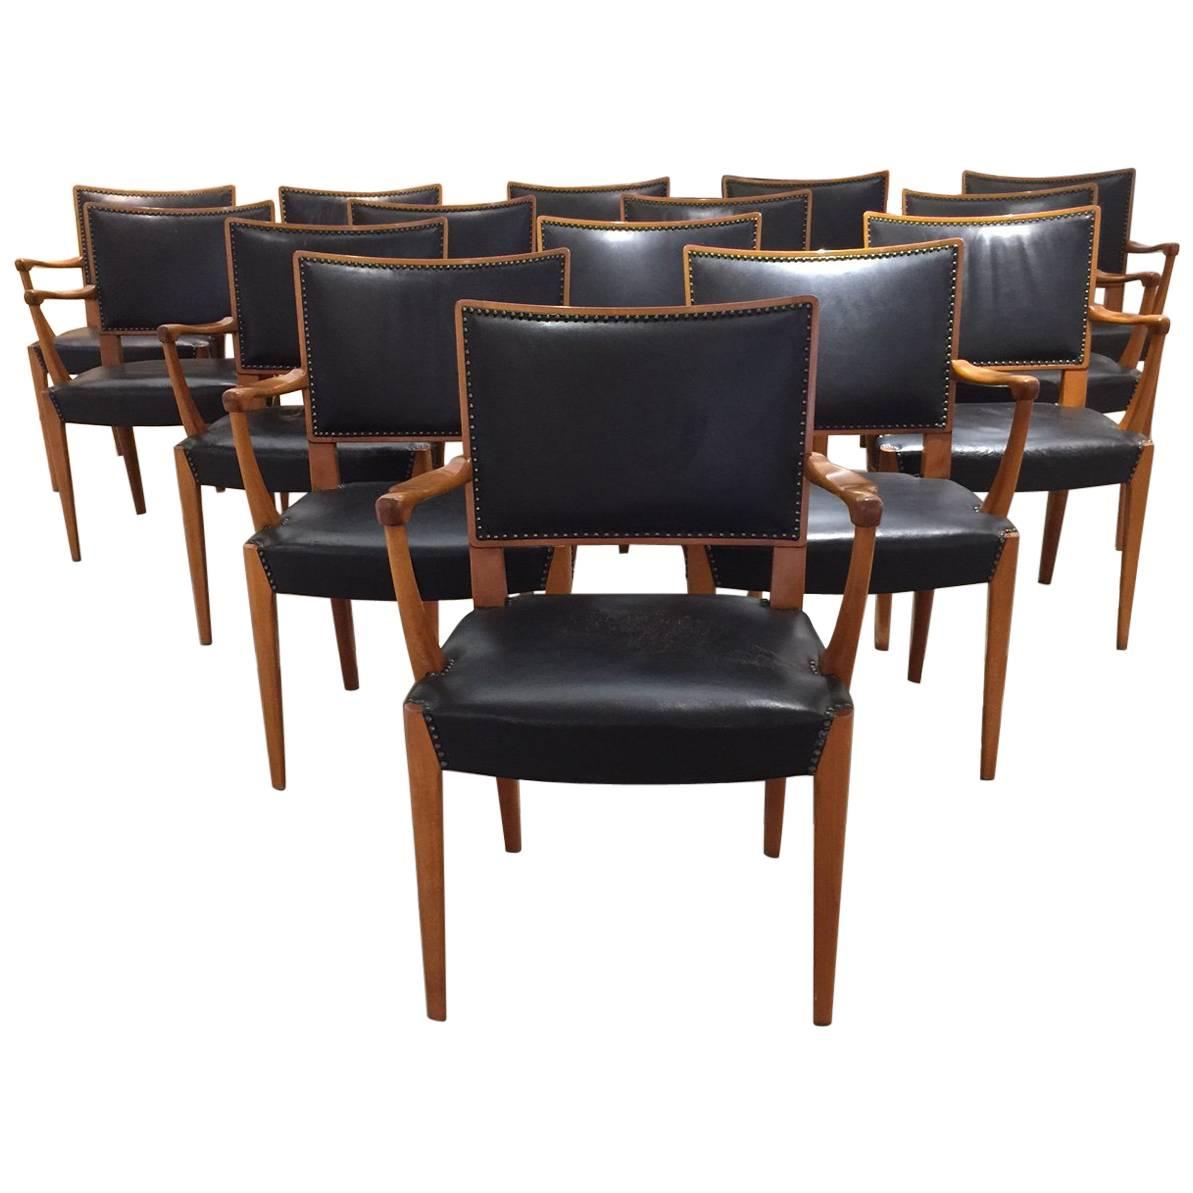 Set of 15 Armchairs Attributed to Axel Einar Hjorth for Sweden, circa 1940